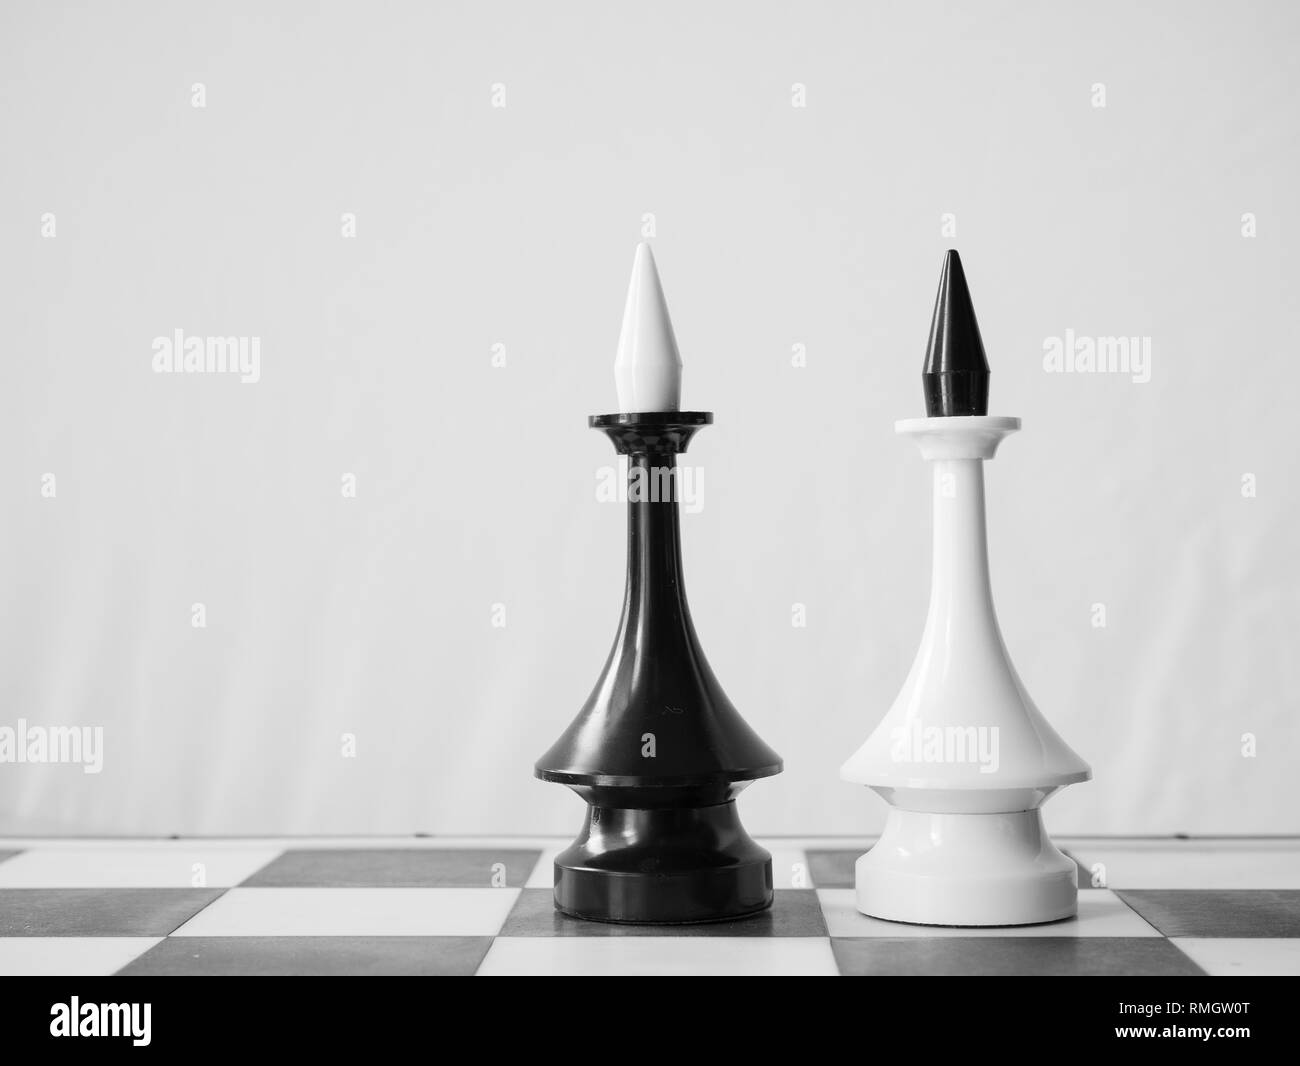 homosexual pair or gay marriage concept. two chessman kings on chessboard Stock Photo